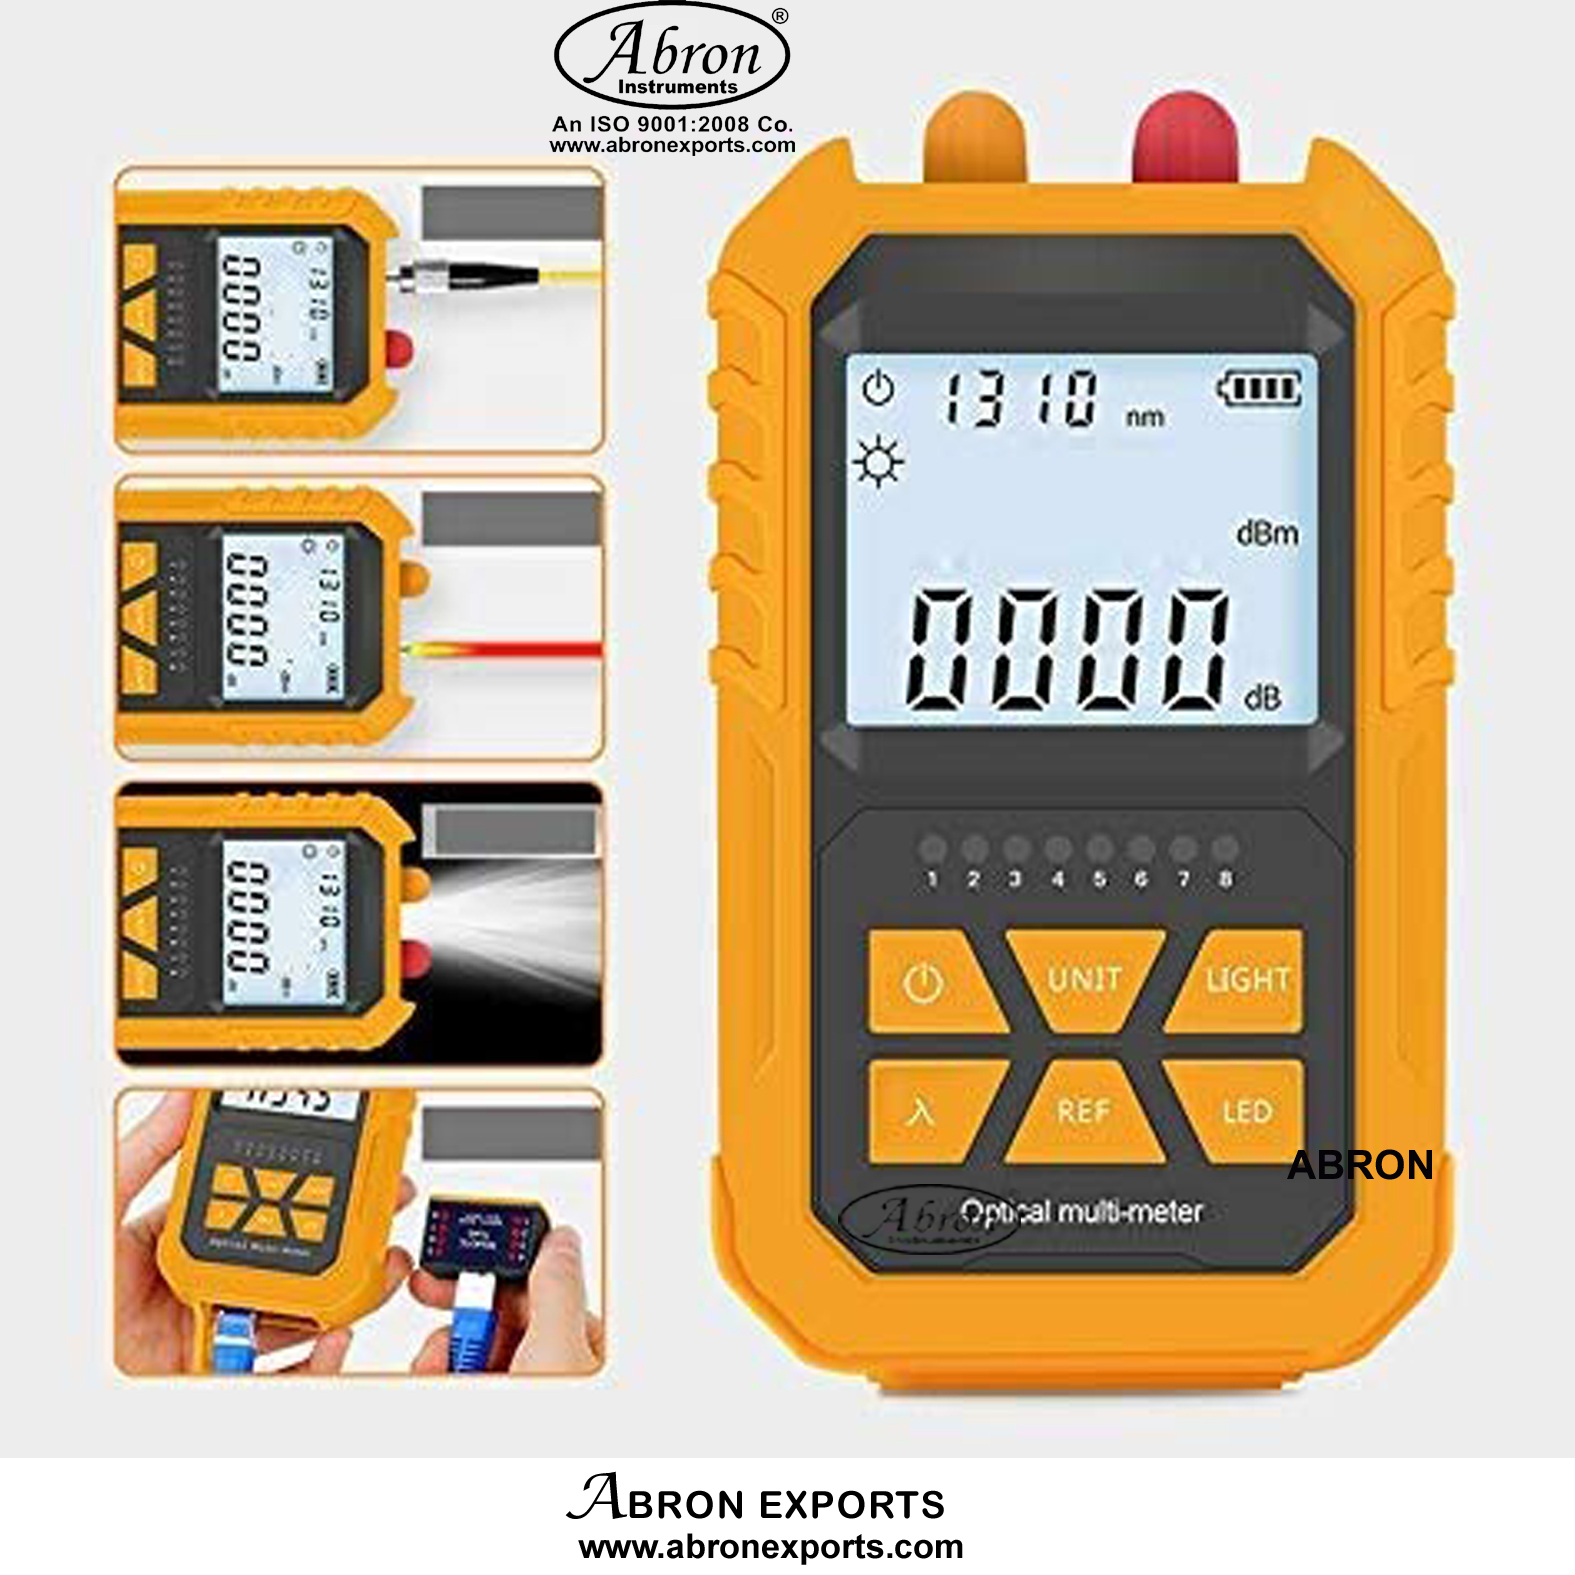 Cable Fault Locator 5 Km testing power meter Rj45 Network cable AE-1217N5